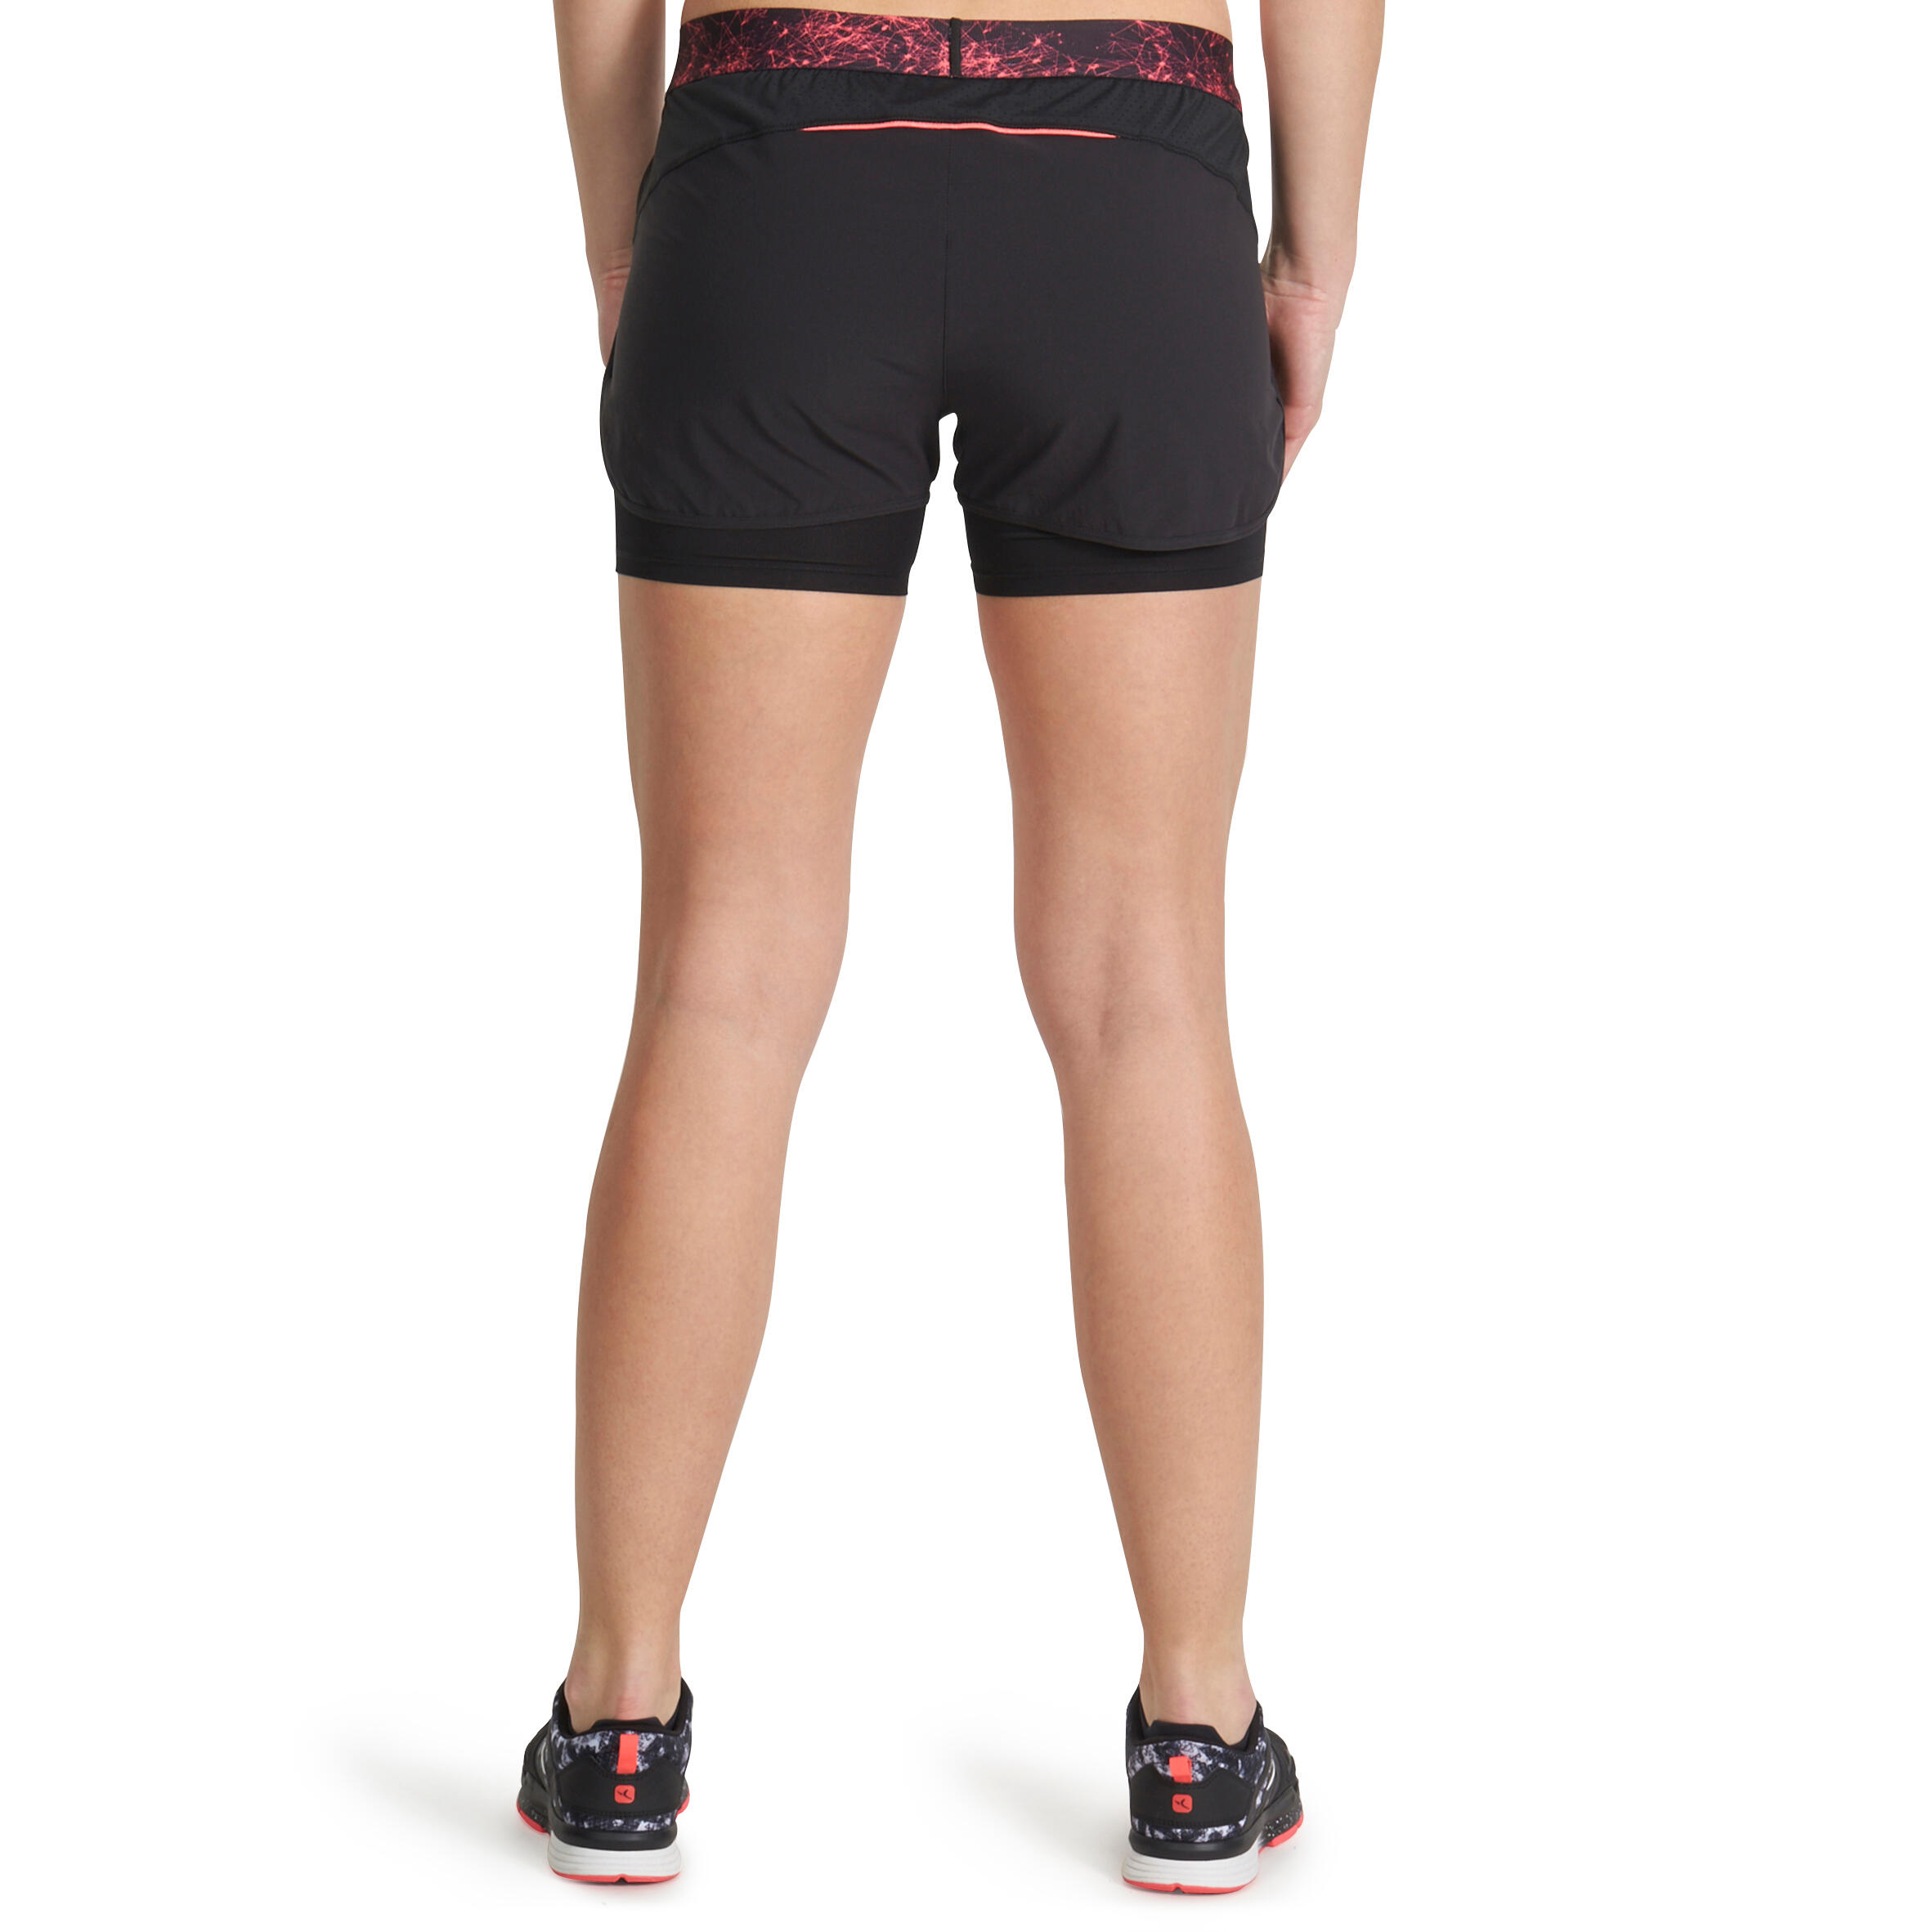 Energy Xtreme Women's 2-in-1 Fitness Shorts - Black/Printed Waistband 4/13